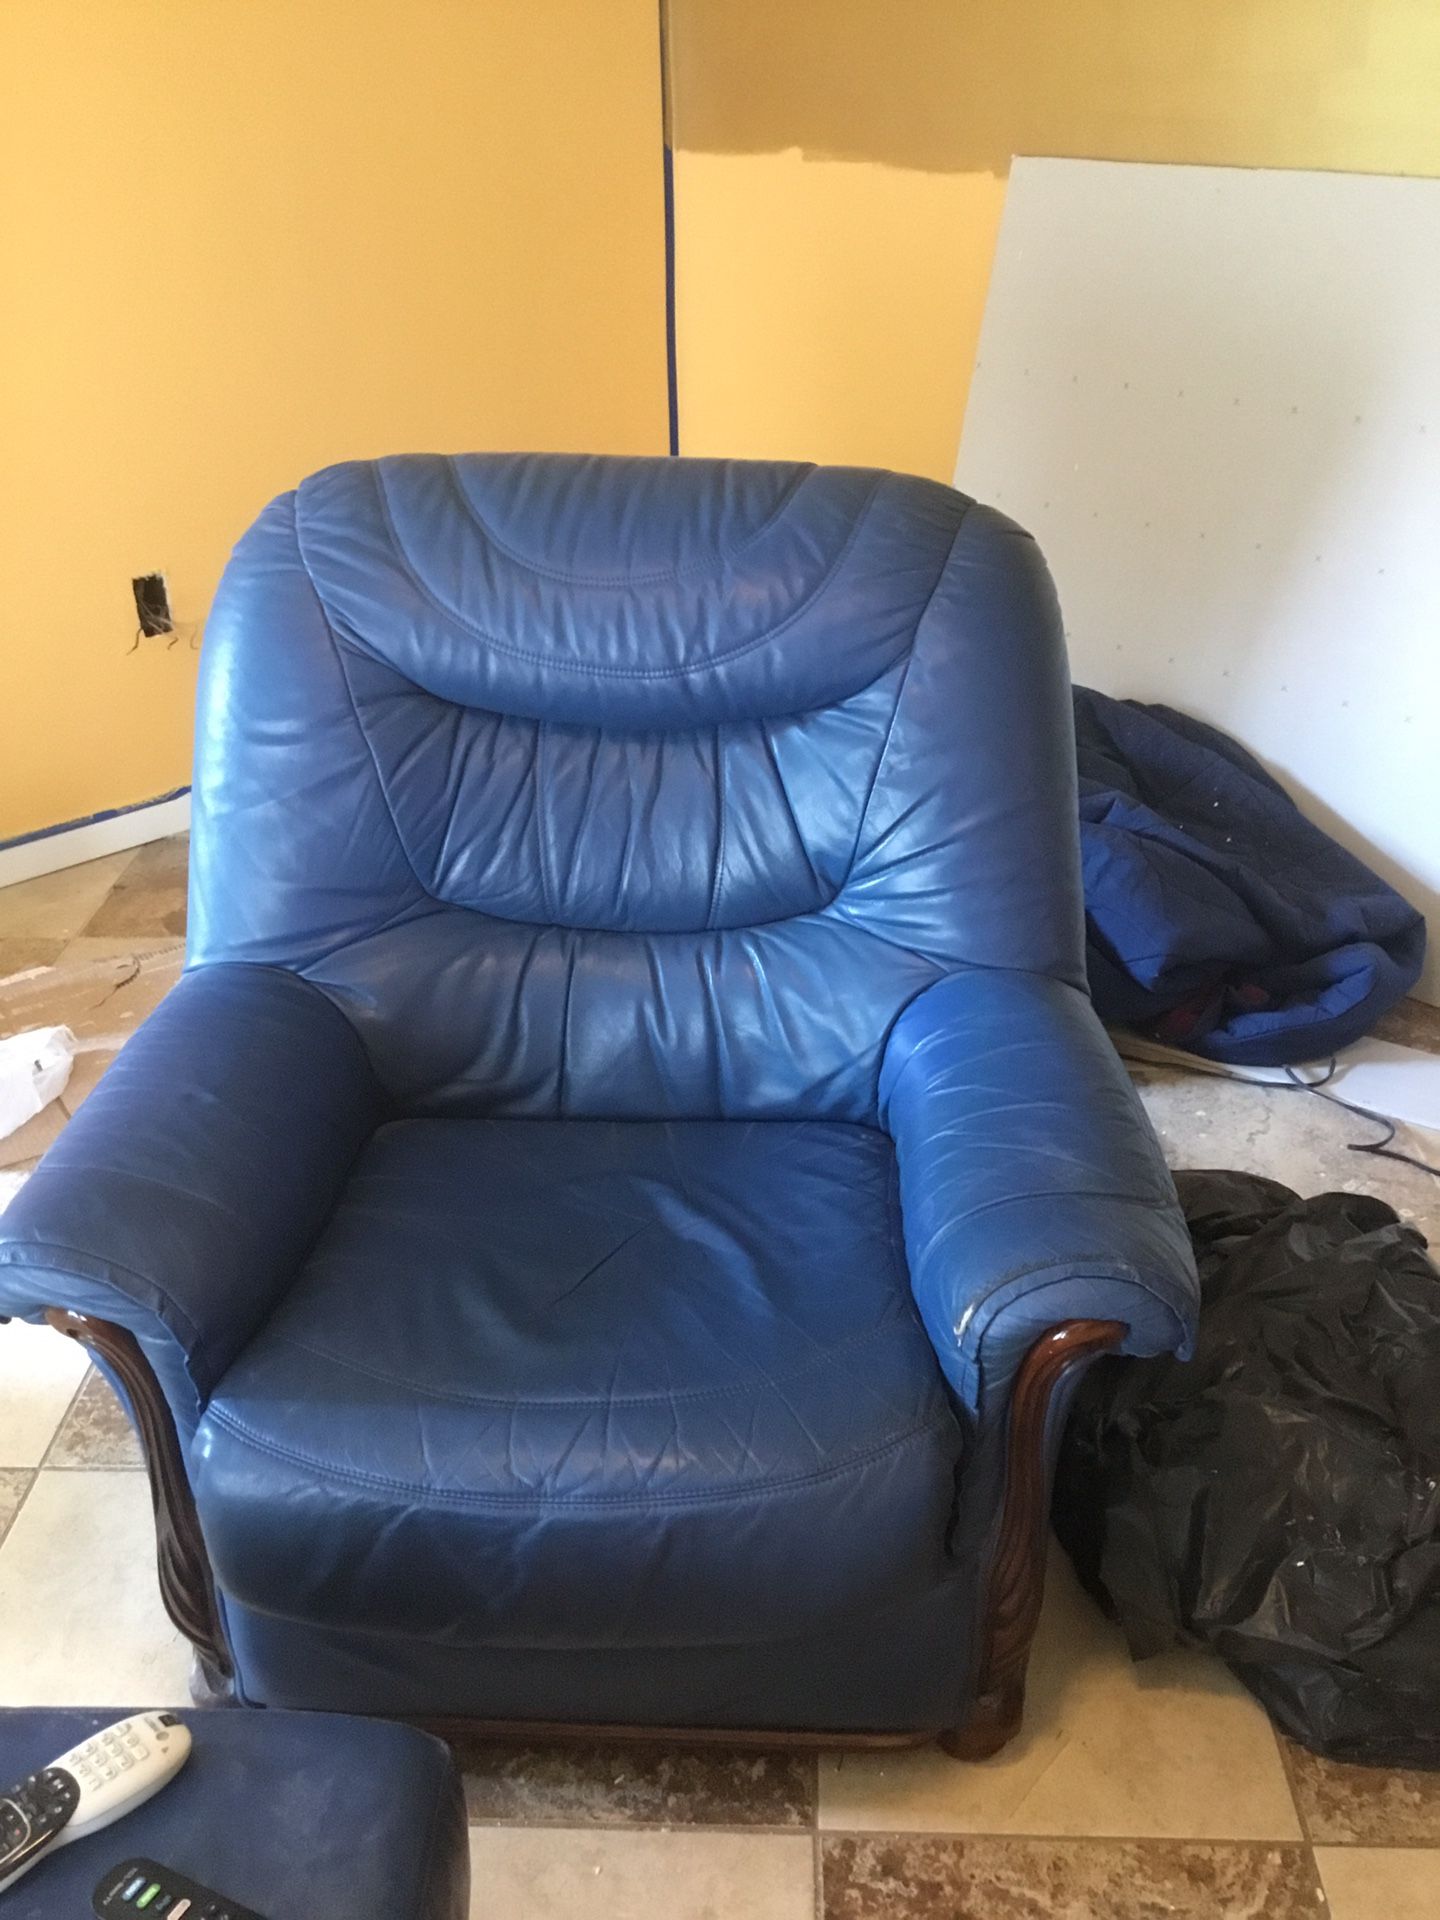 Very nice Italian leather chair, futon and area rug for sale. Make an offer!